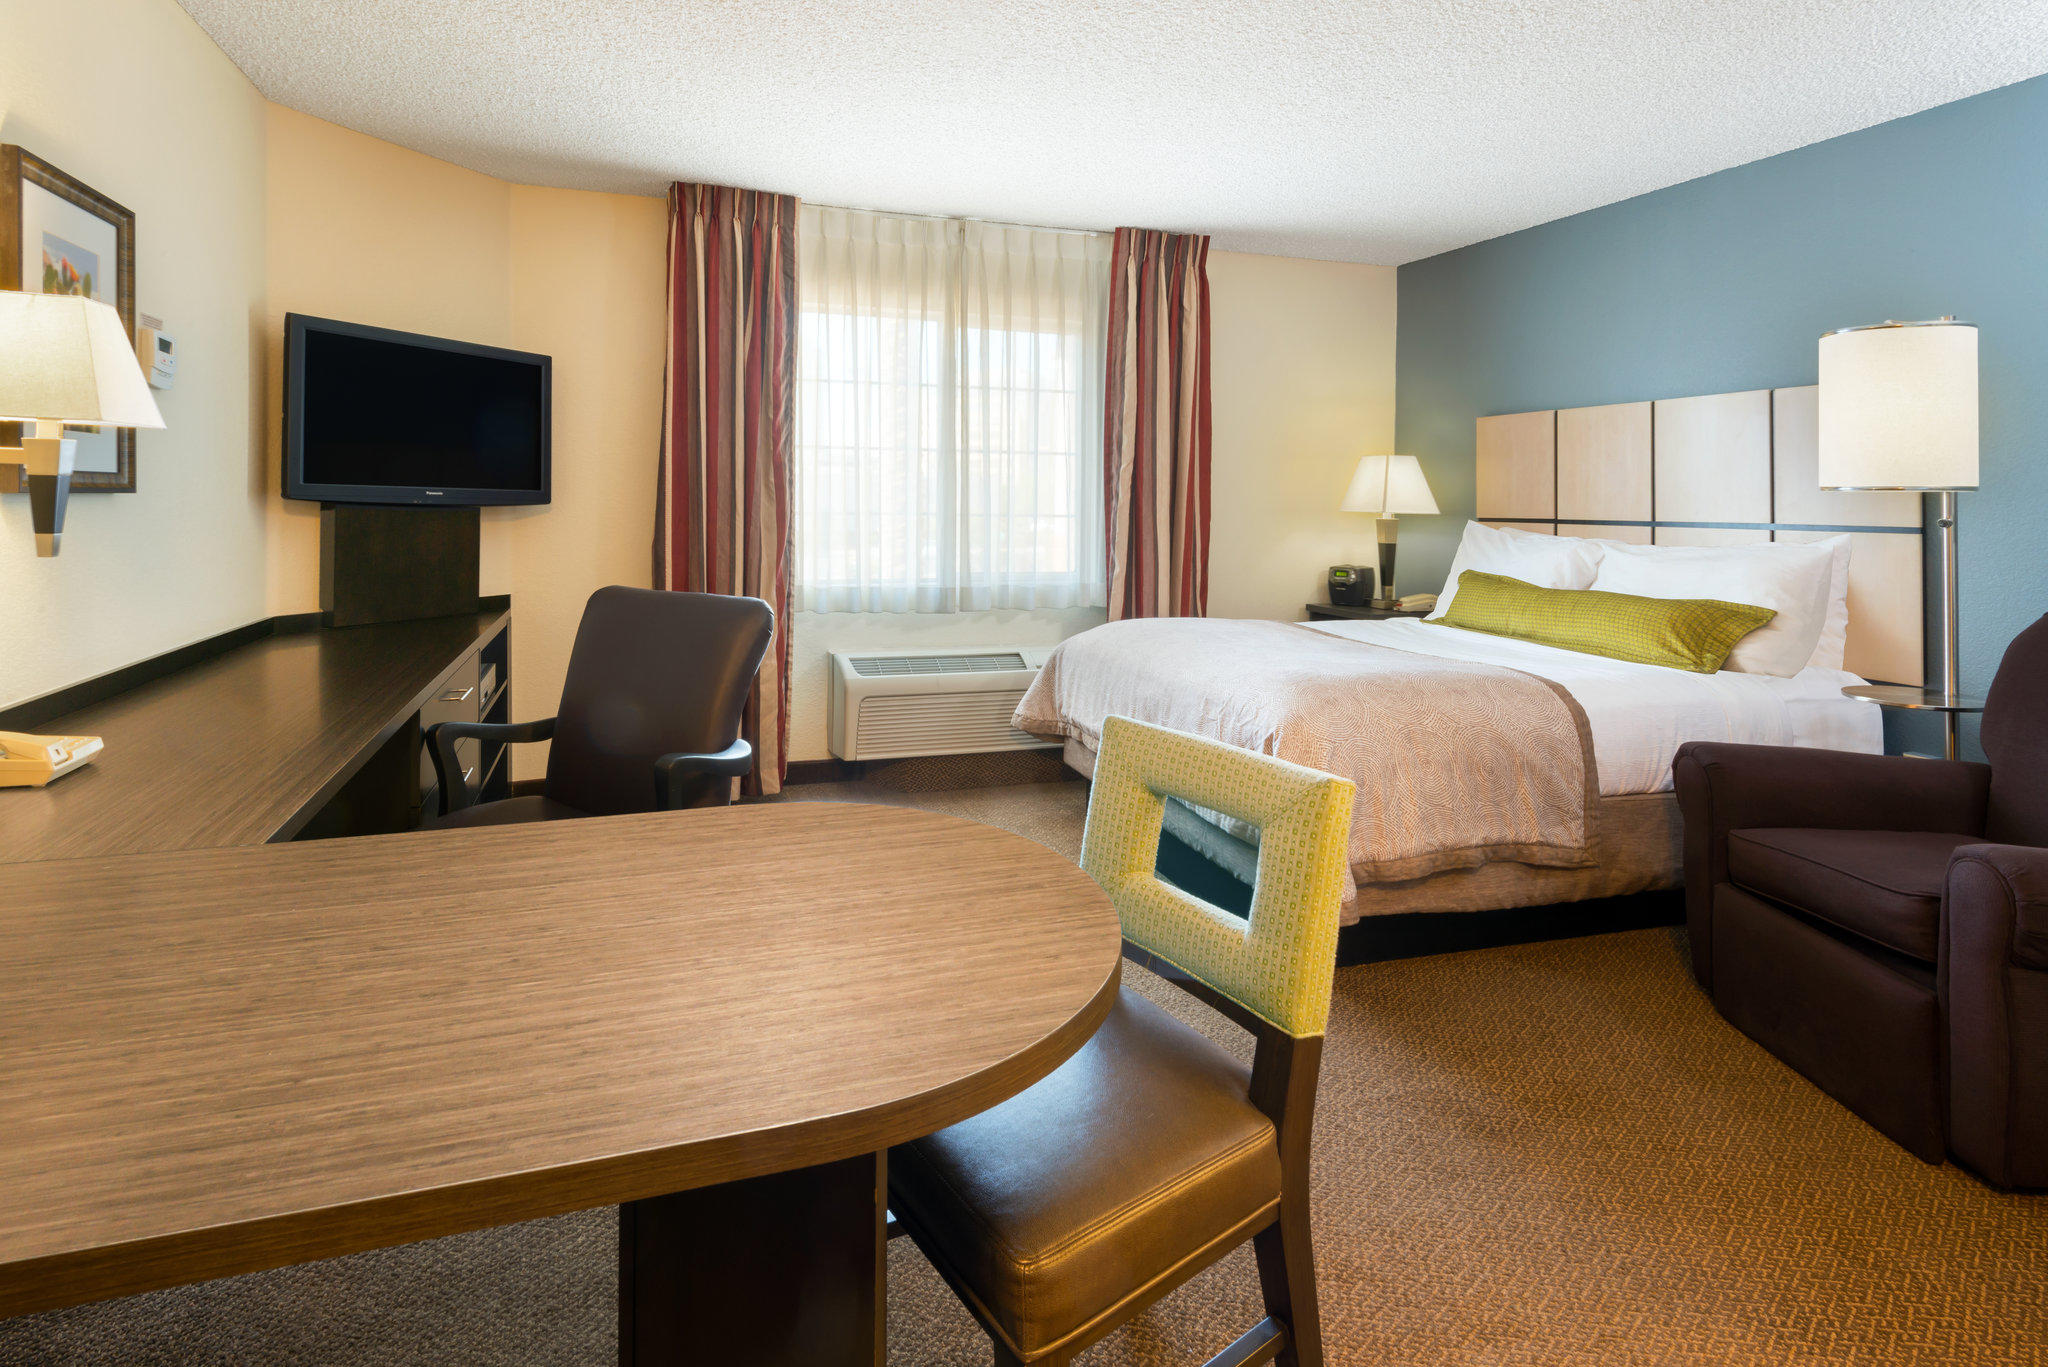 Candlewood Suites Chicago-O`Hare Photo